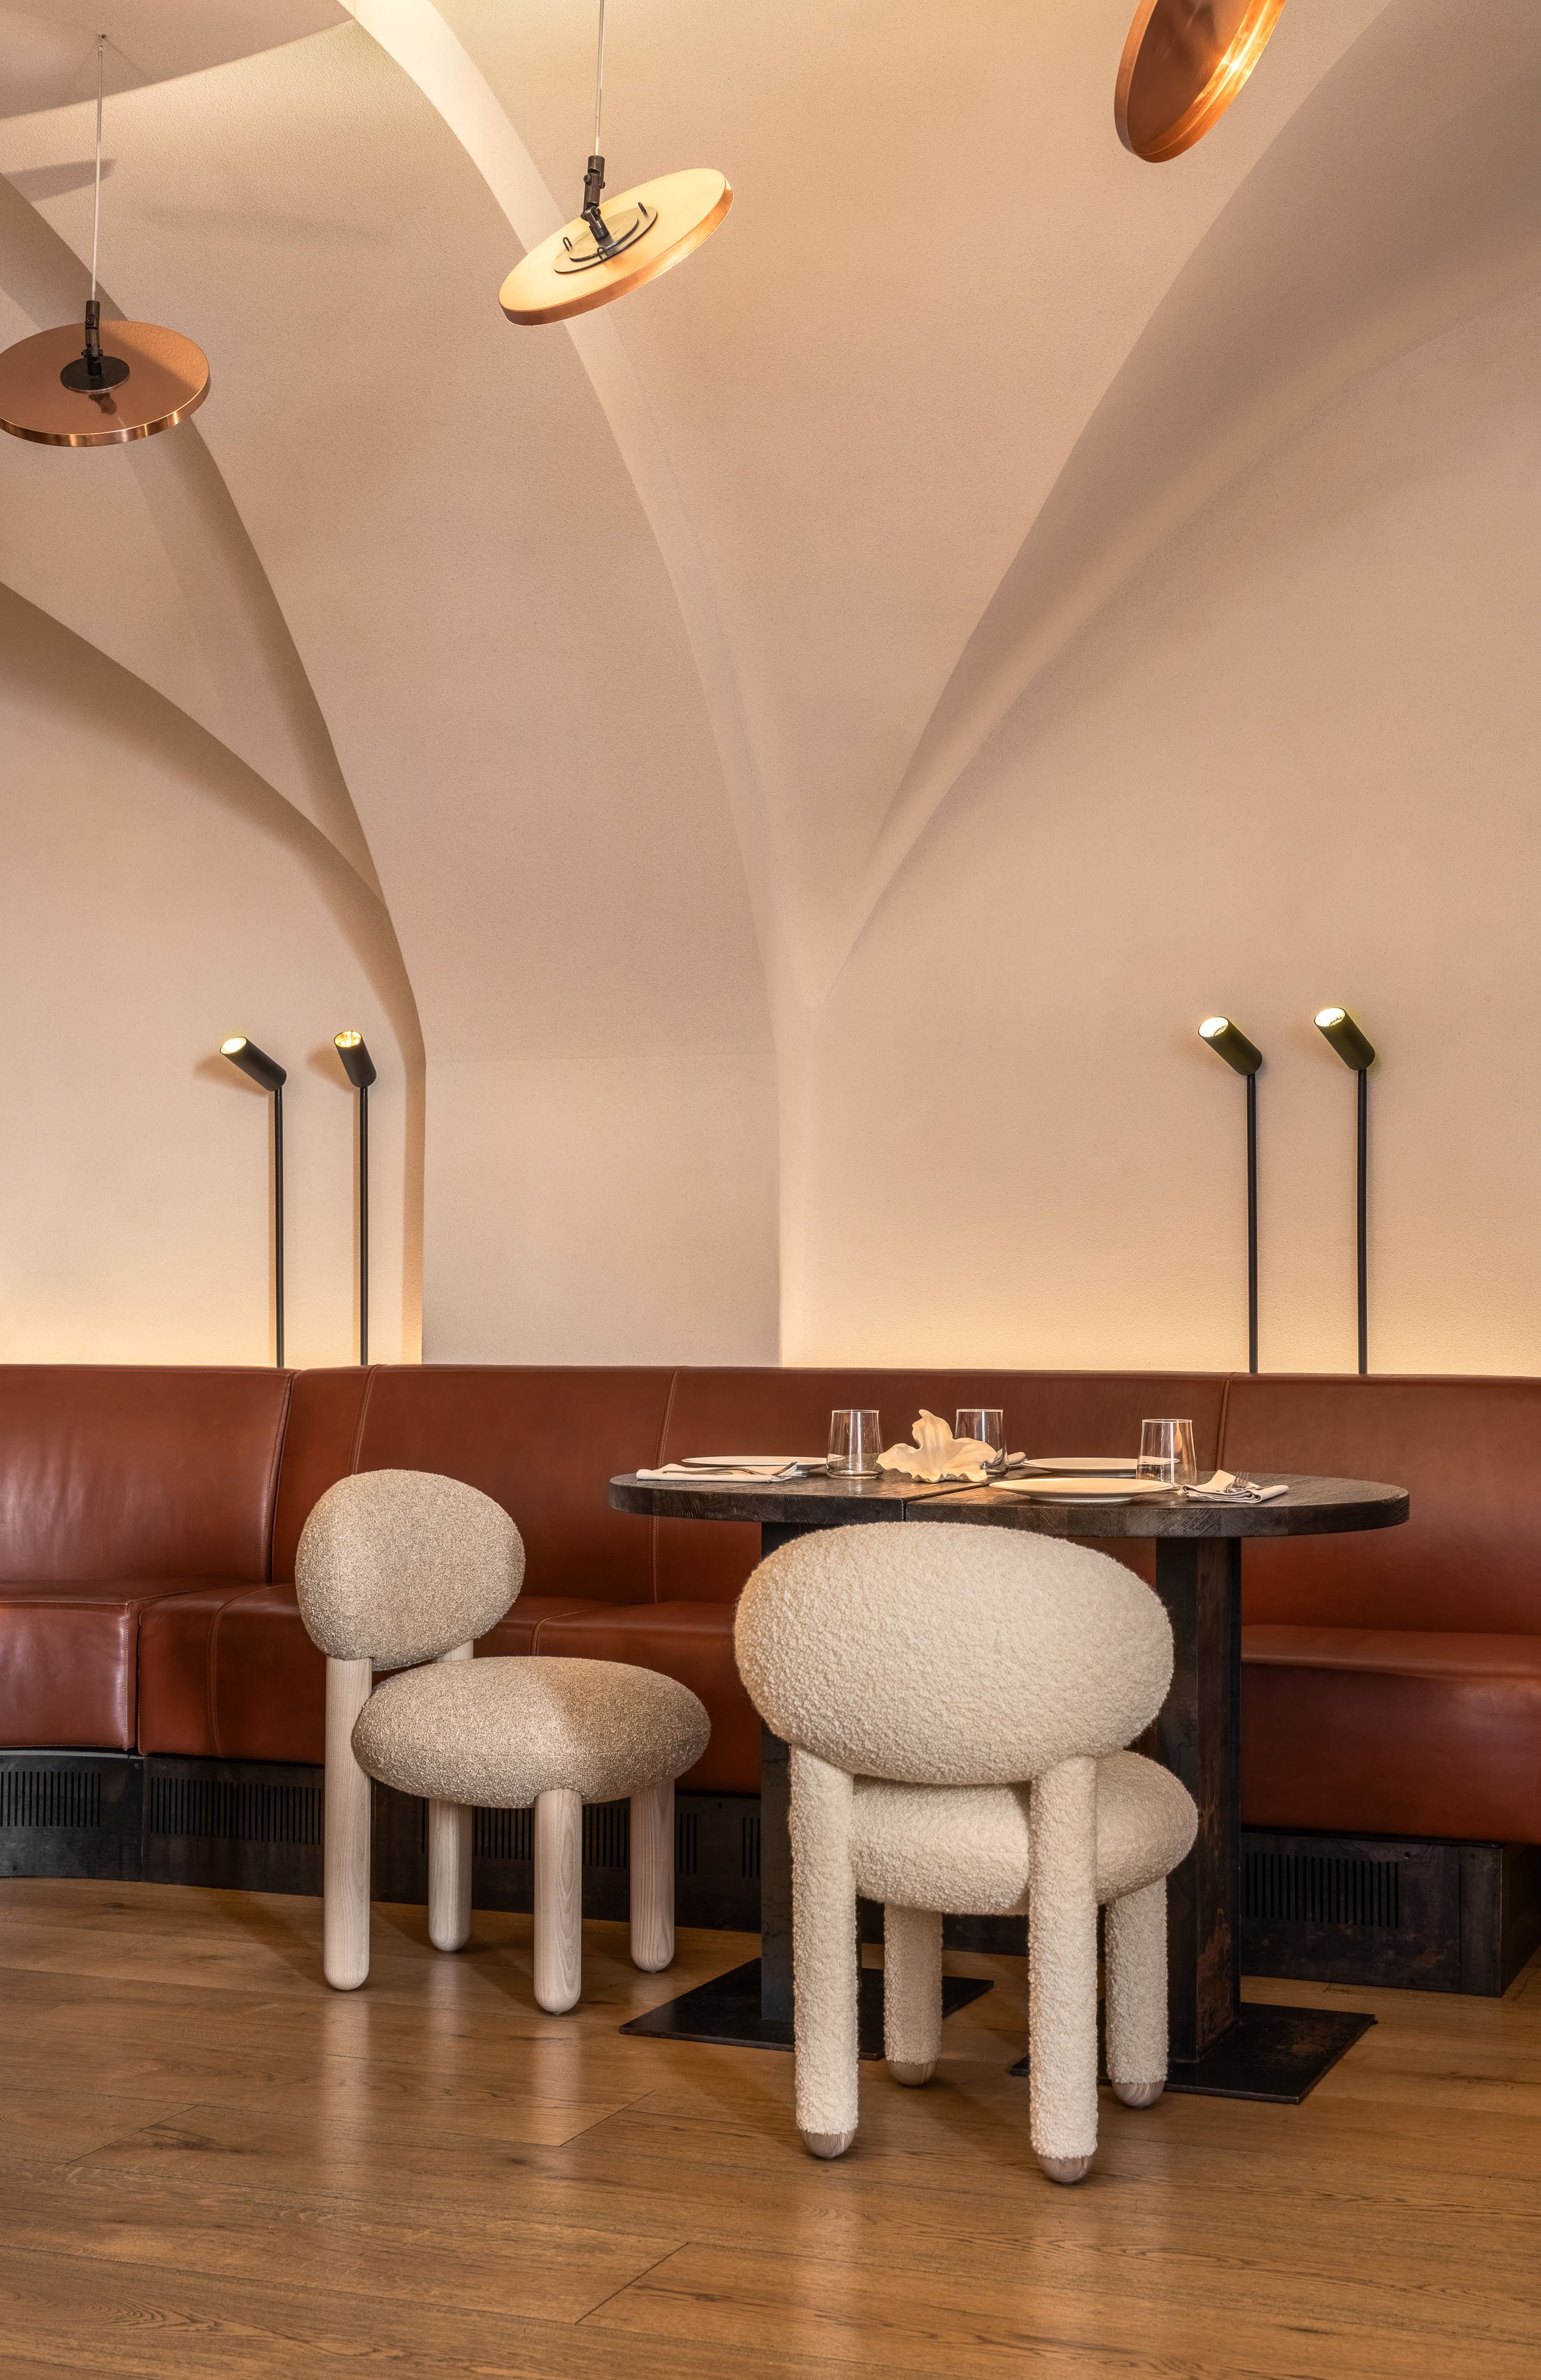 Flock chairs by NOOM in Samna restaurant by YOD Group (4)a.jpg